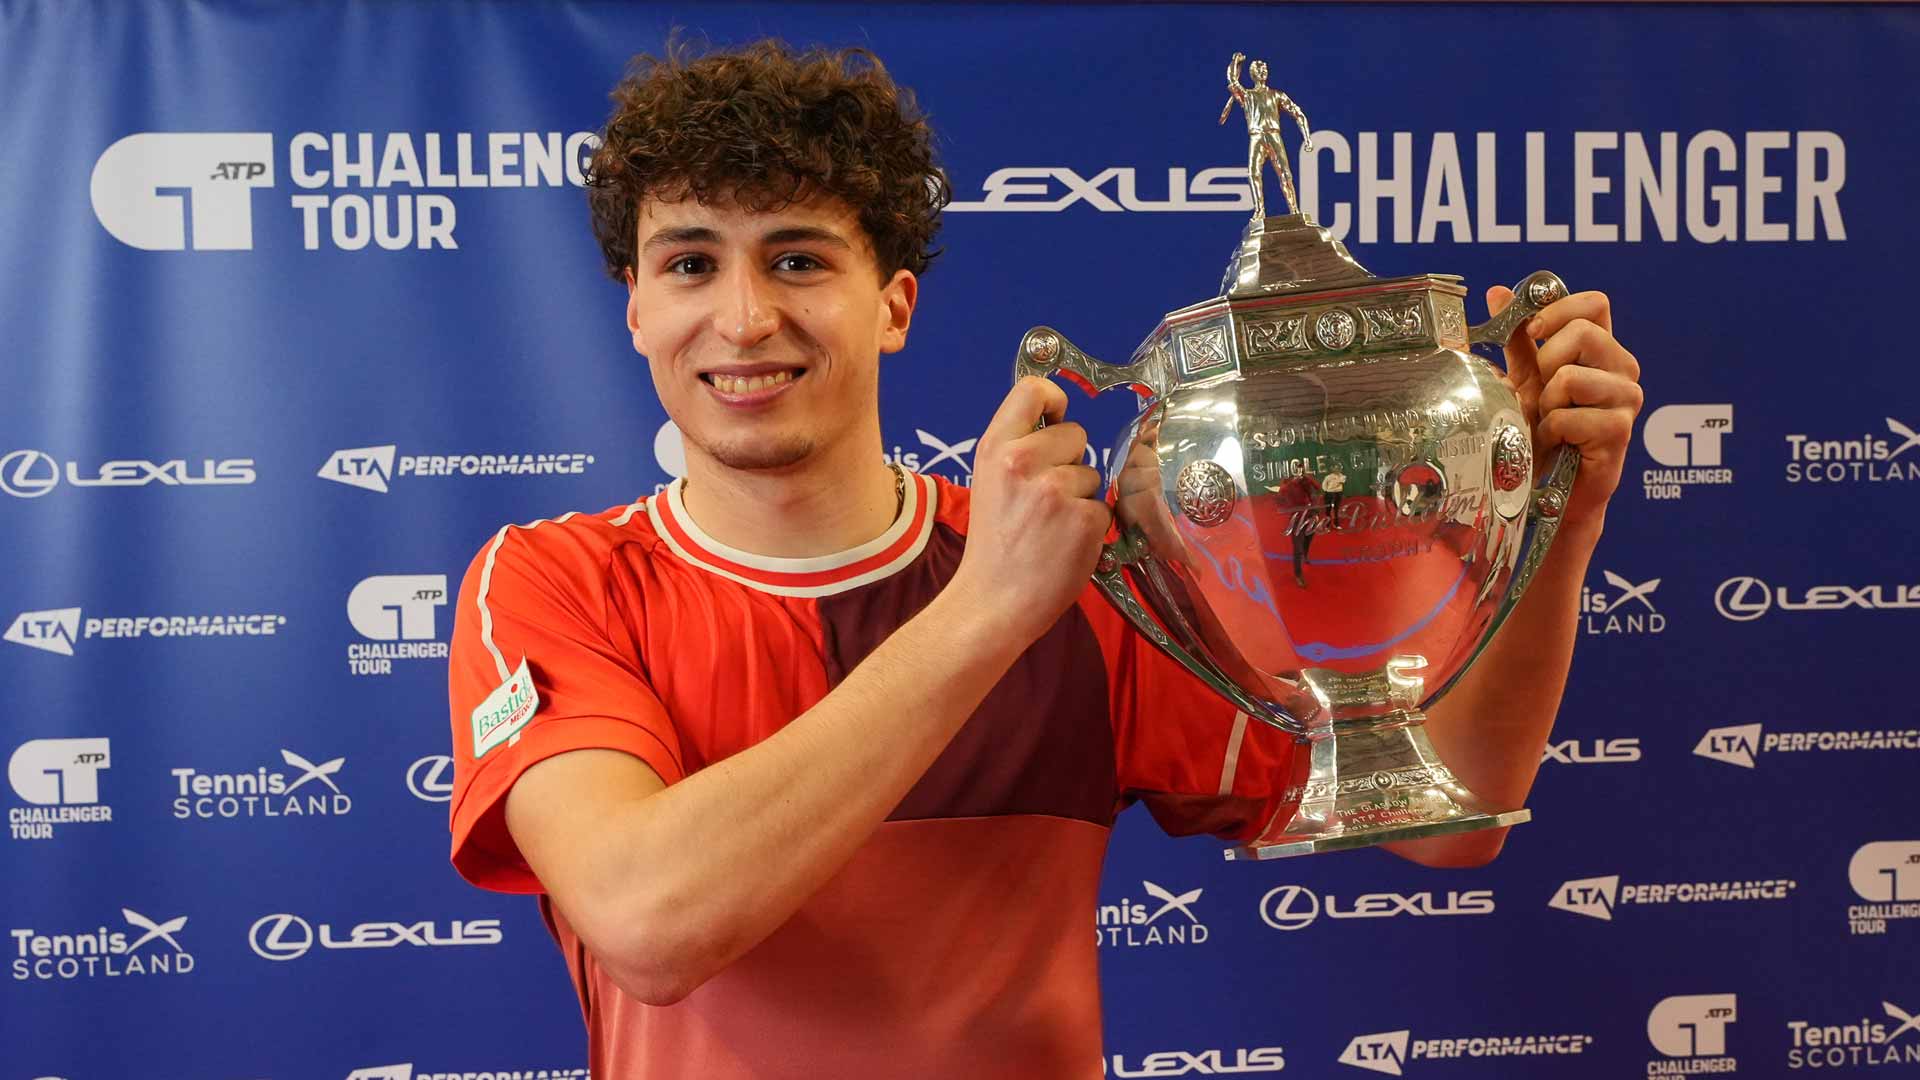 Clement Chidekh wins the ATP Challenger 50 event in Glasgow, Scotland.